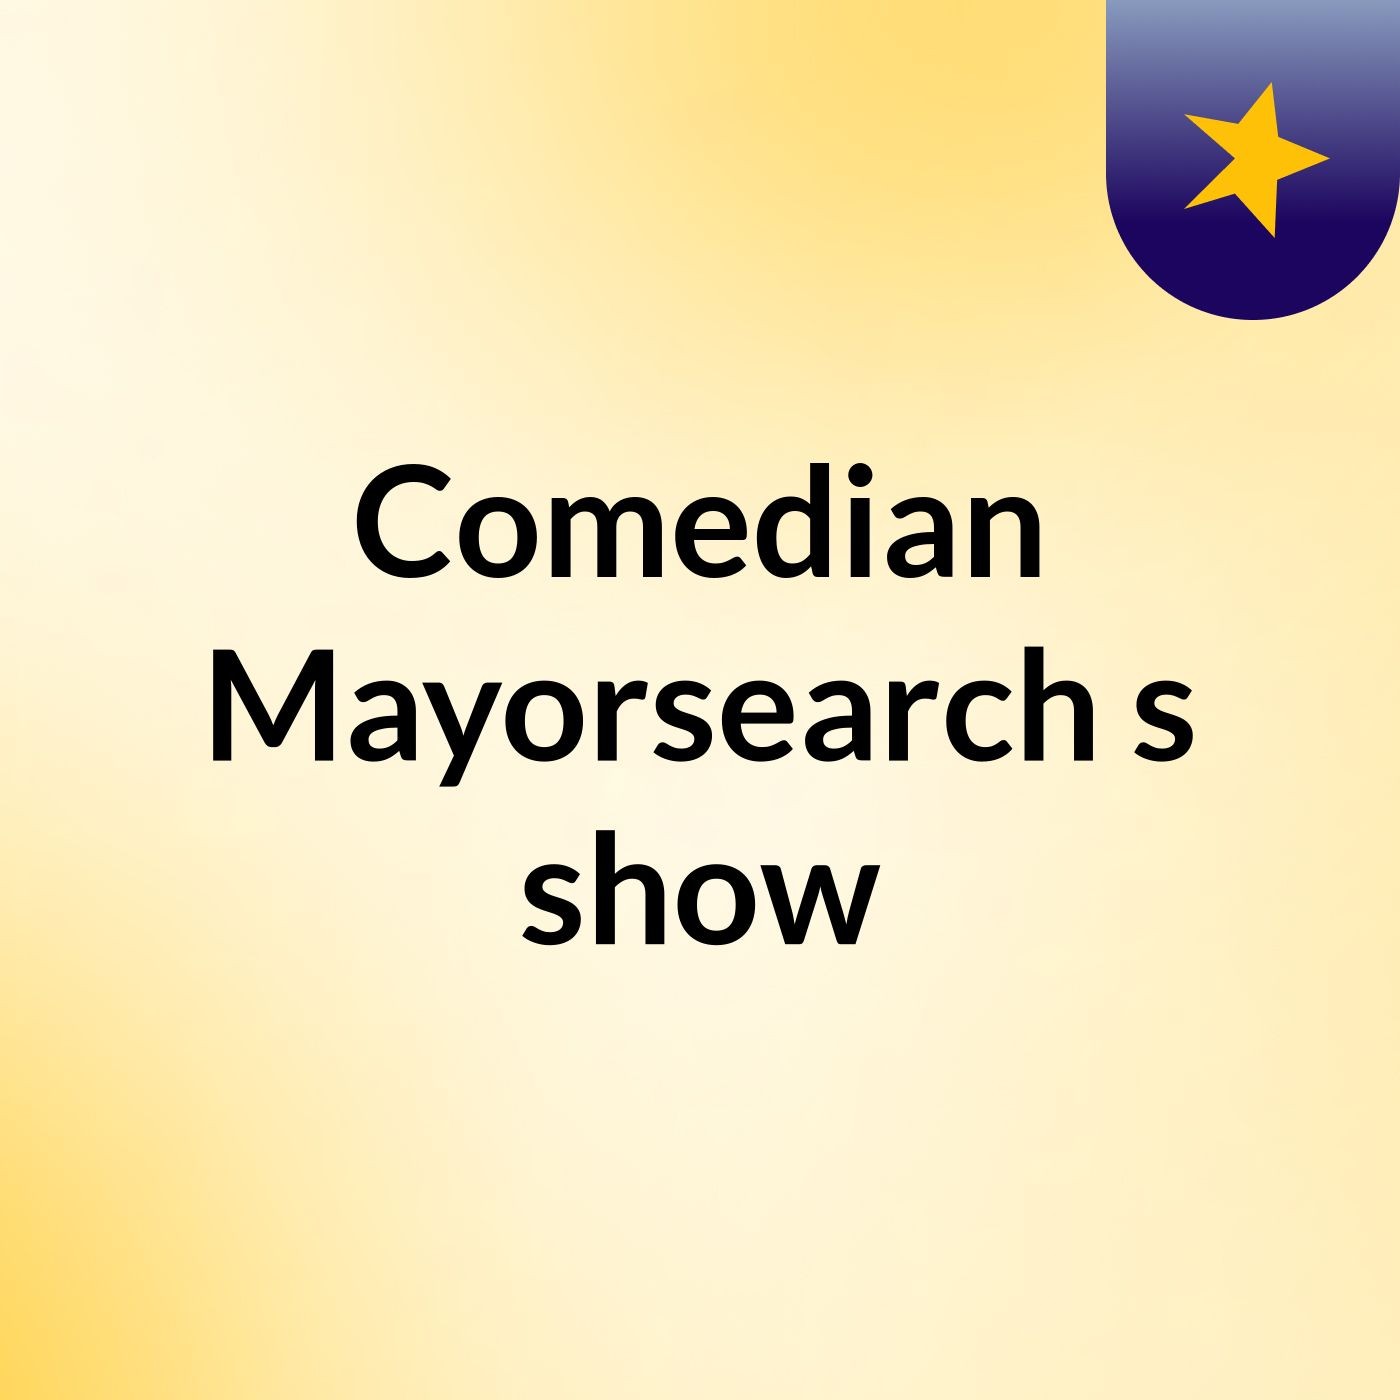 Comedian Mayorsearch's show